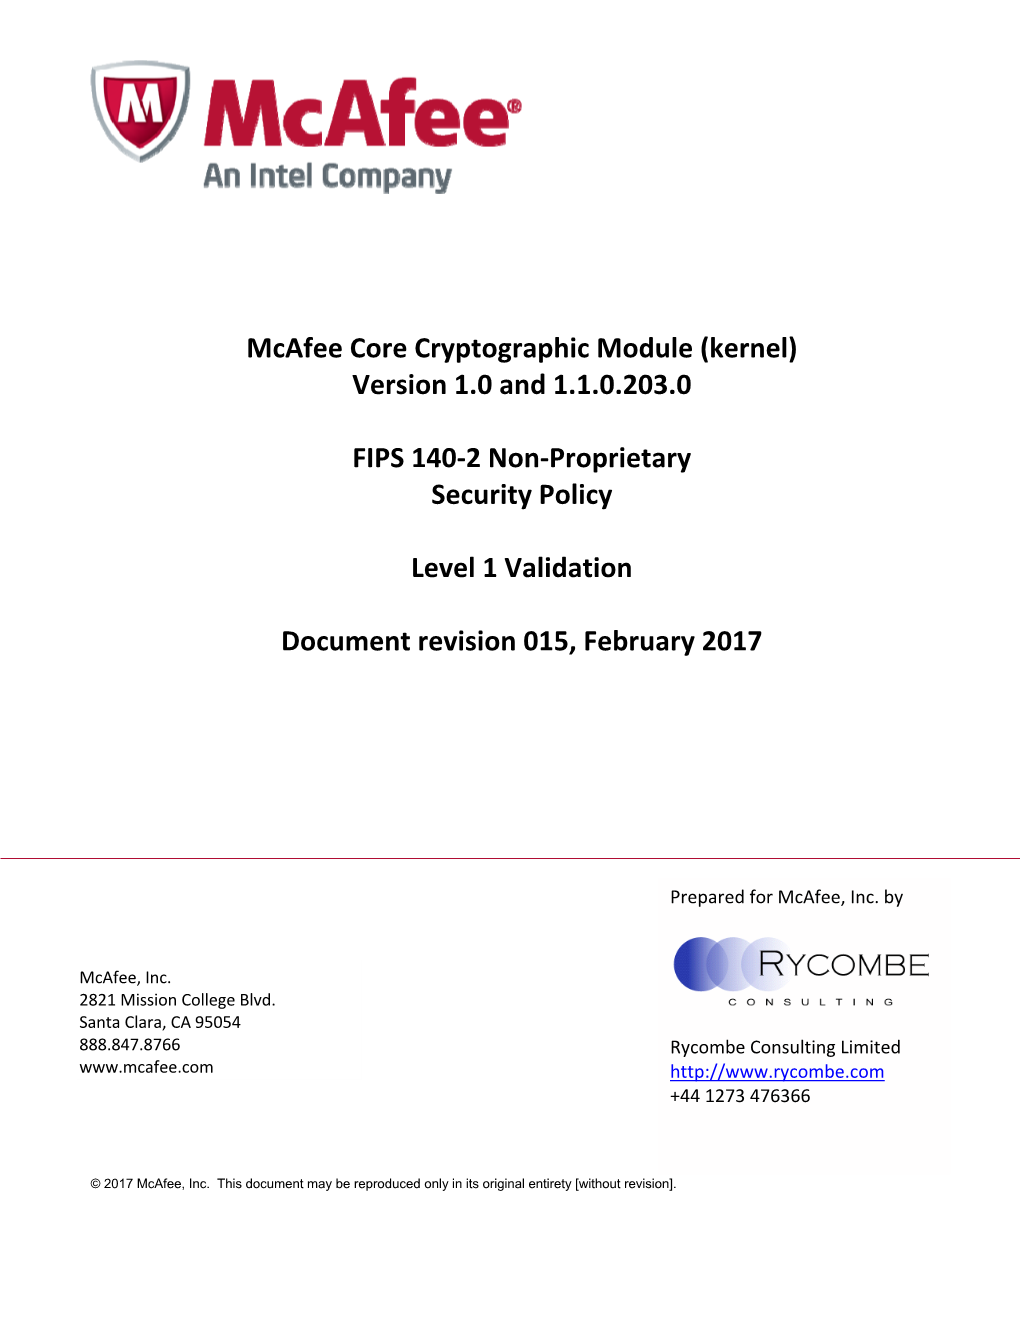 Mcafee Core Cryptographic Module (Kernel) Version 1.0 and 1.1.0.203.0 FIPS 140-2 Non-Proprietary Security Policy Level 1 Valid